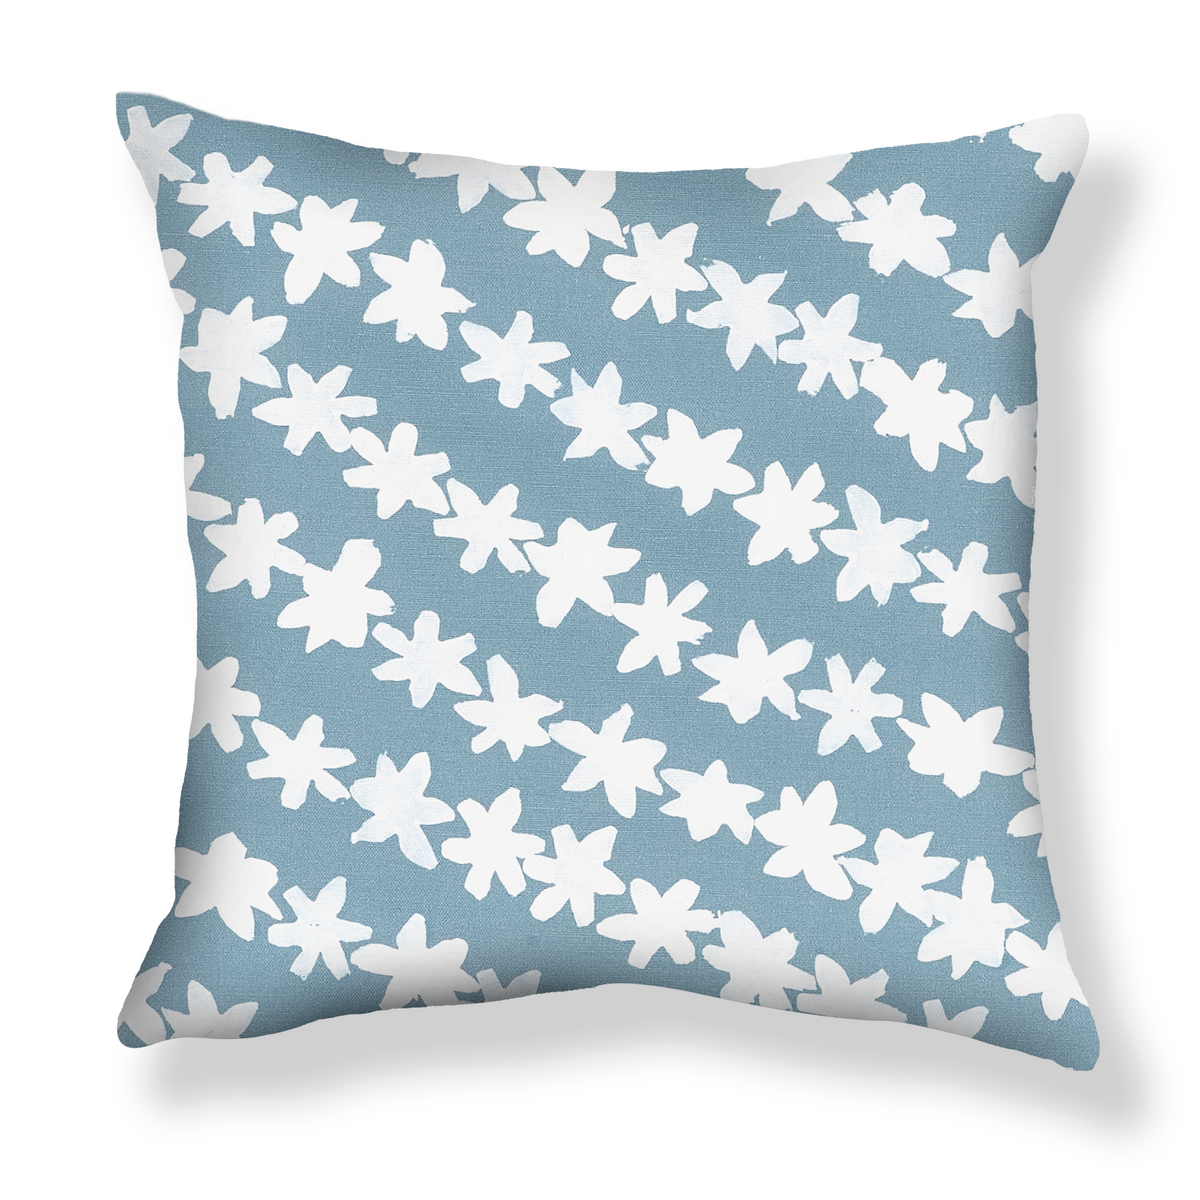 Stamped Garland Pillow in Harbor Blue